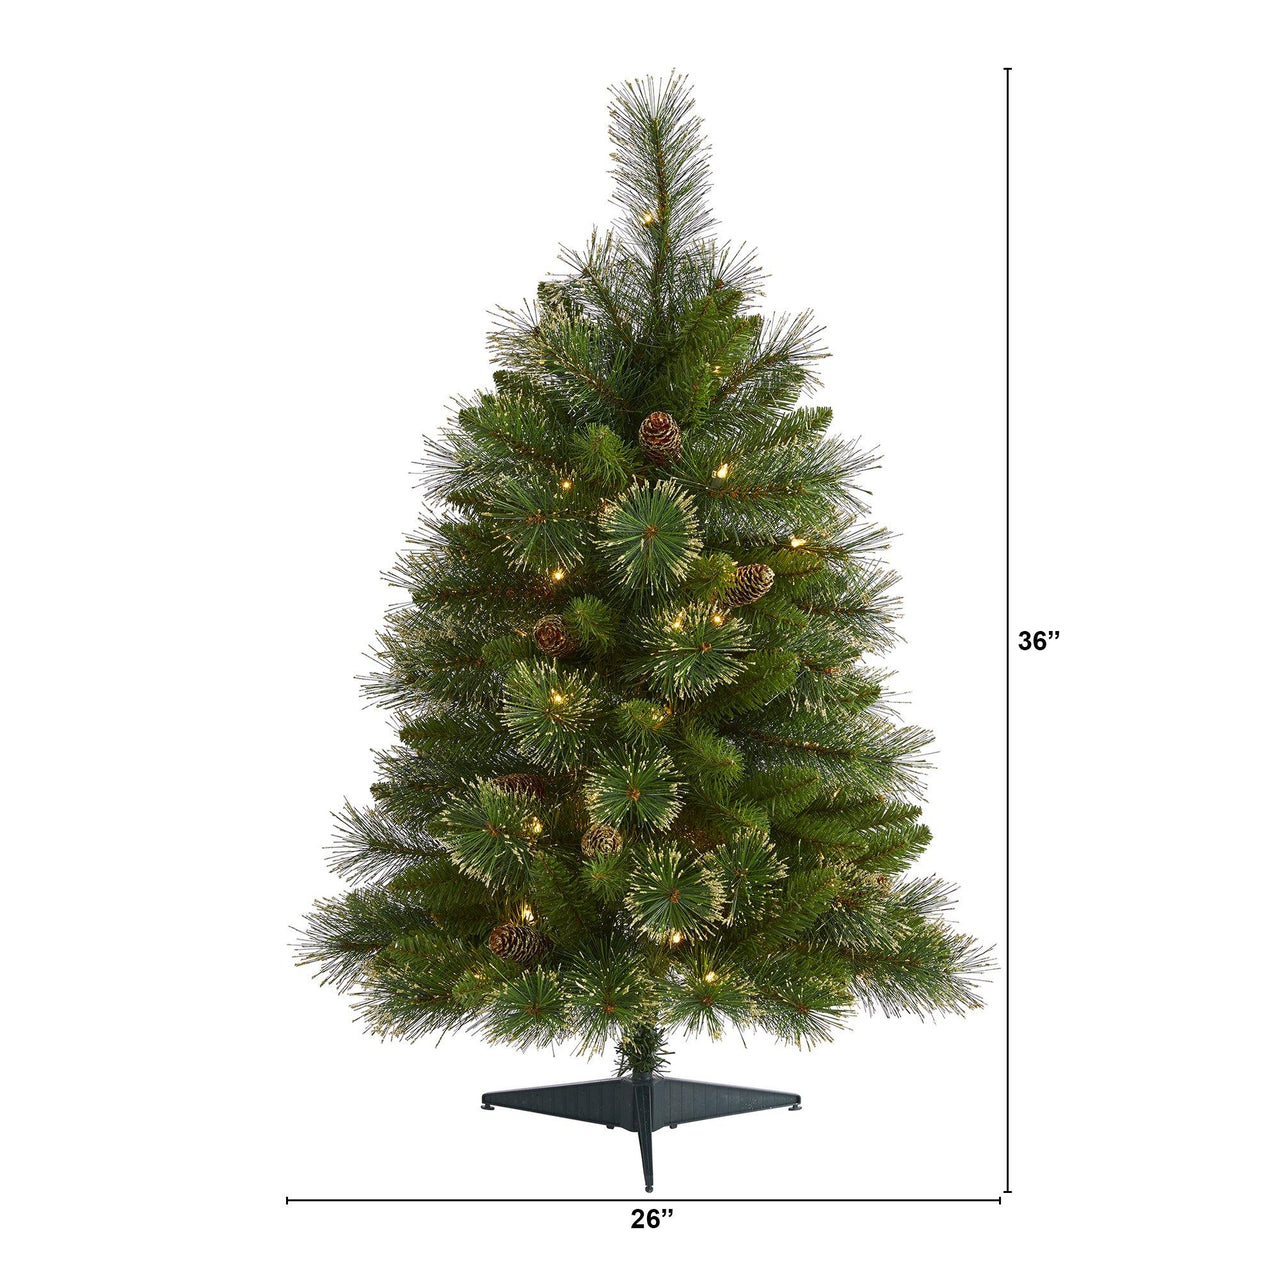 3’ Golden Tip Washington Pine Artificial Christmas Tree with 50 Clear Lights, Pine Cones and 148 Bendable Branches - The Fox Decor